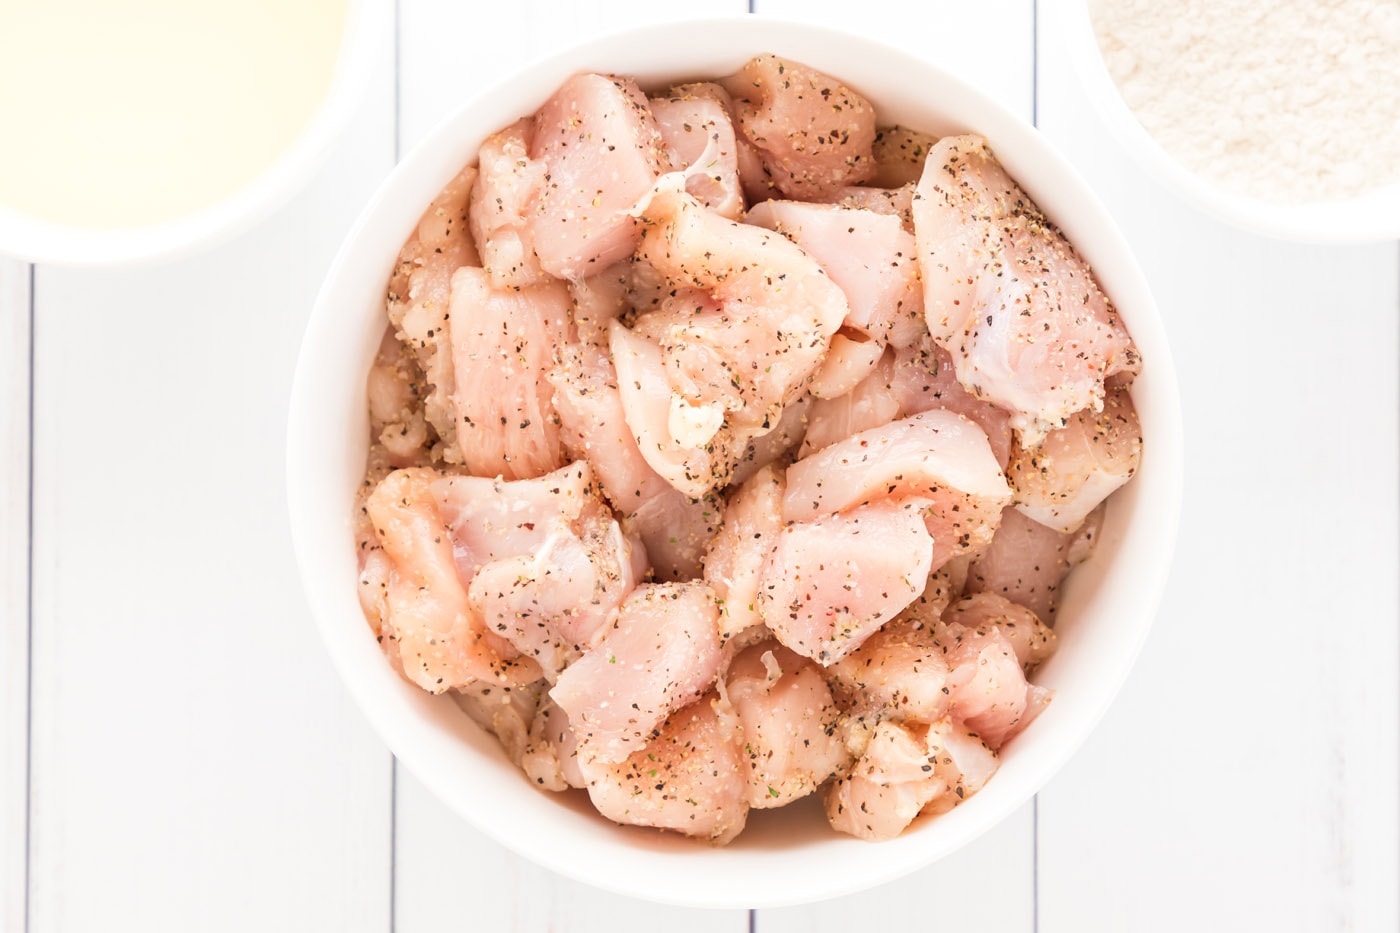 cubed and seasoned chicken breasts